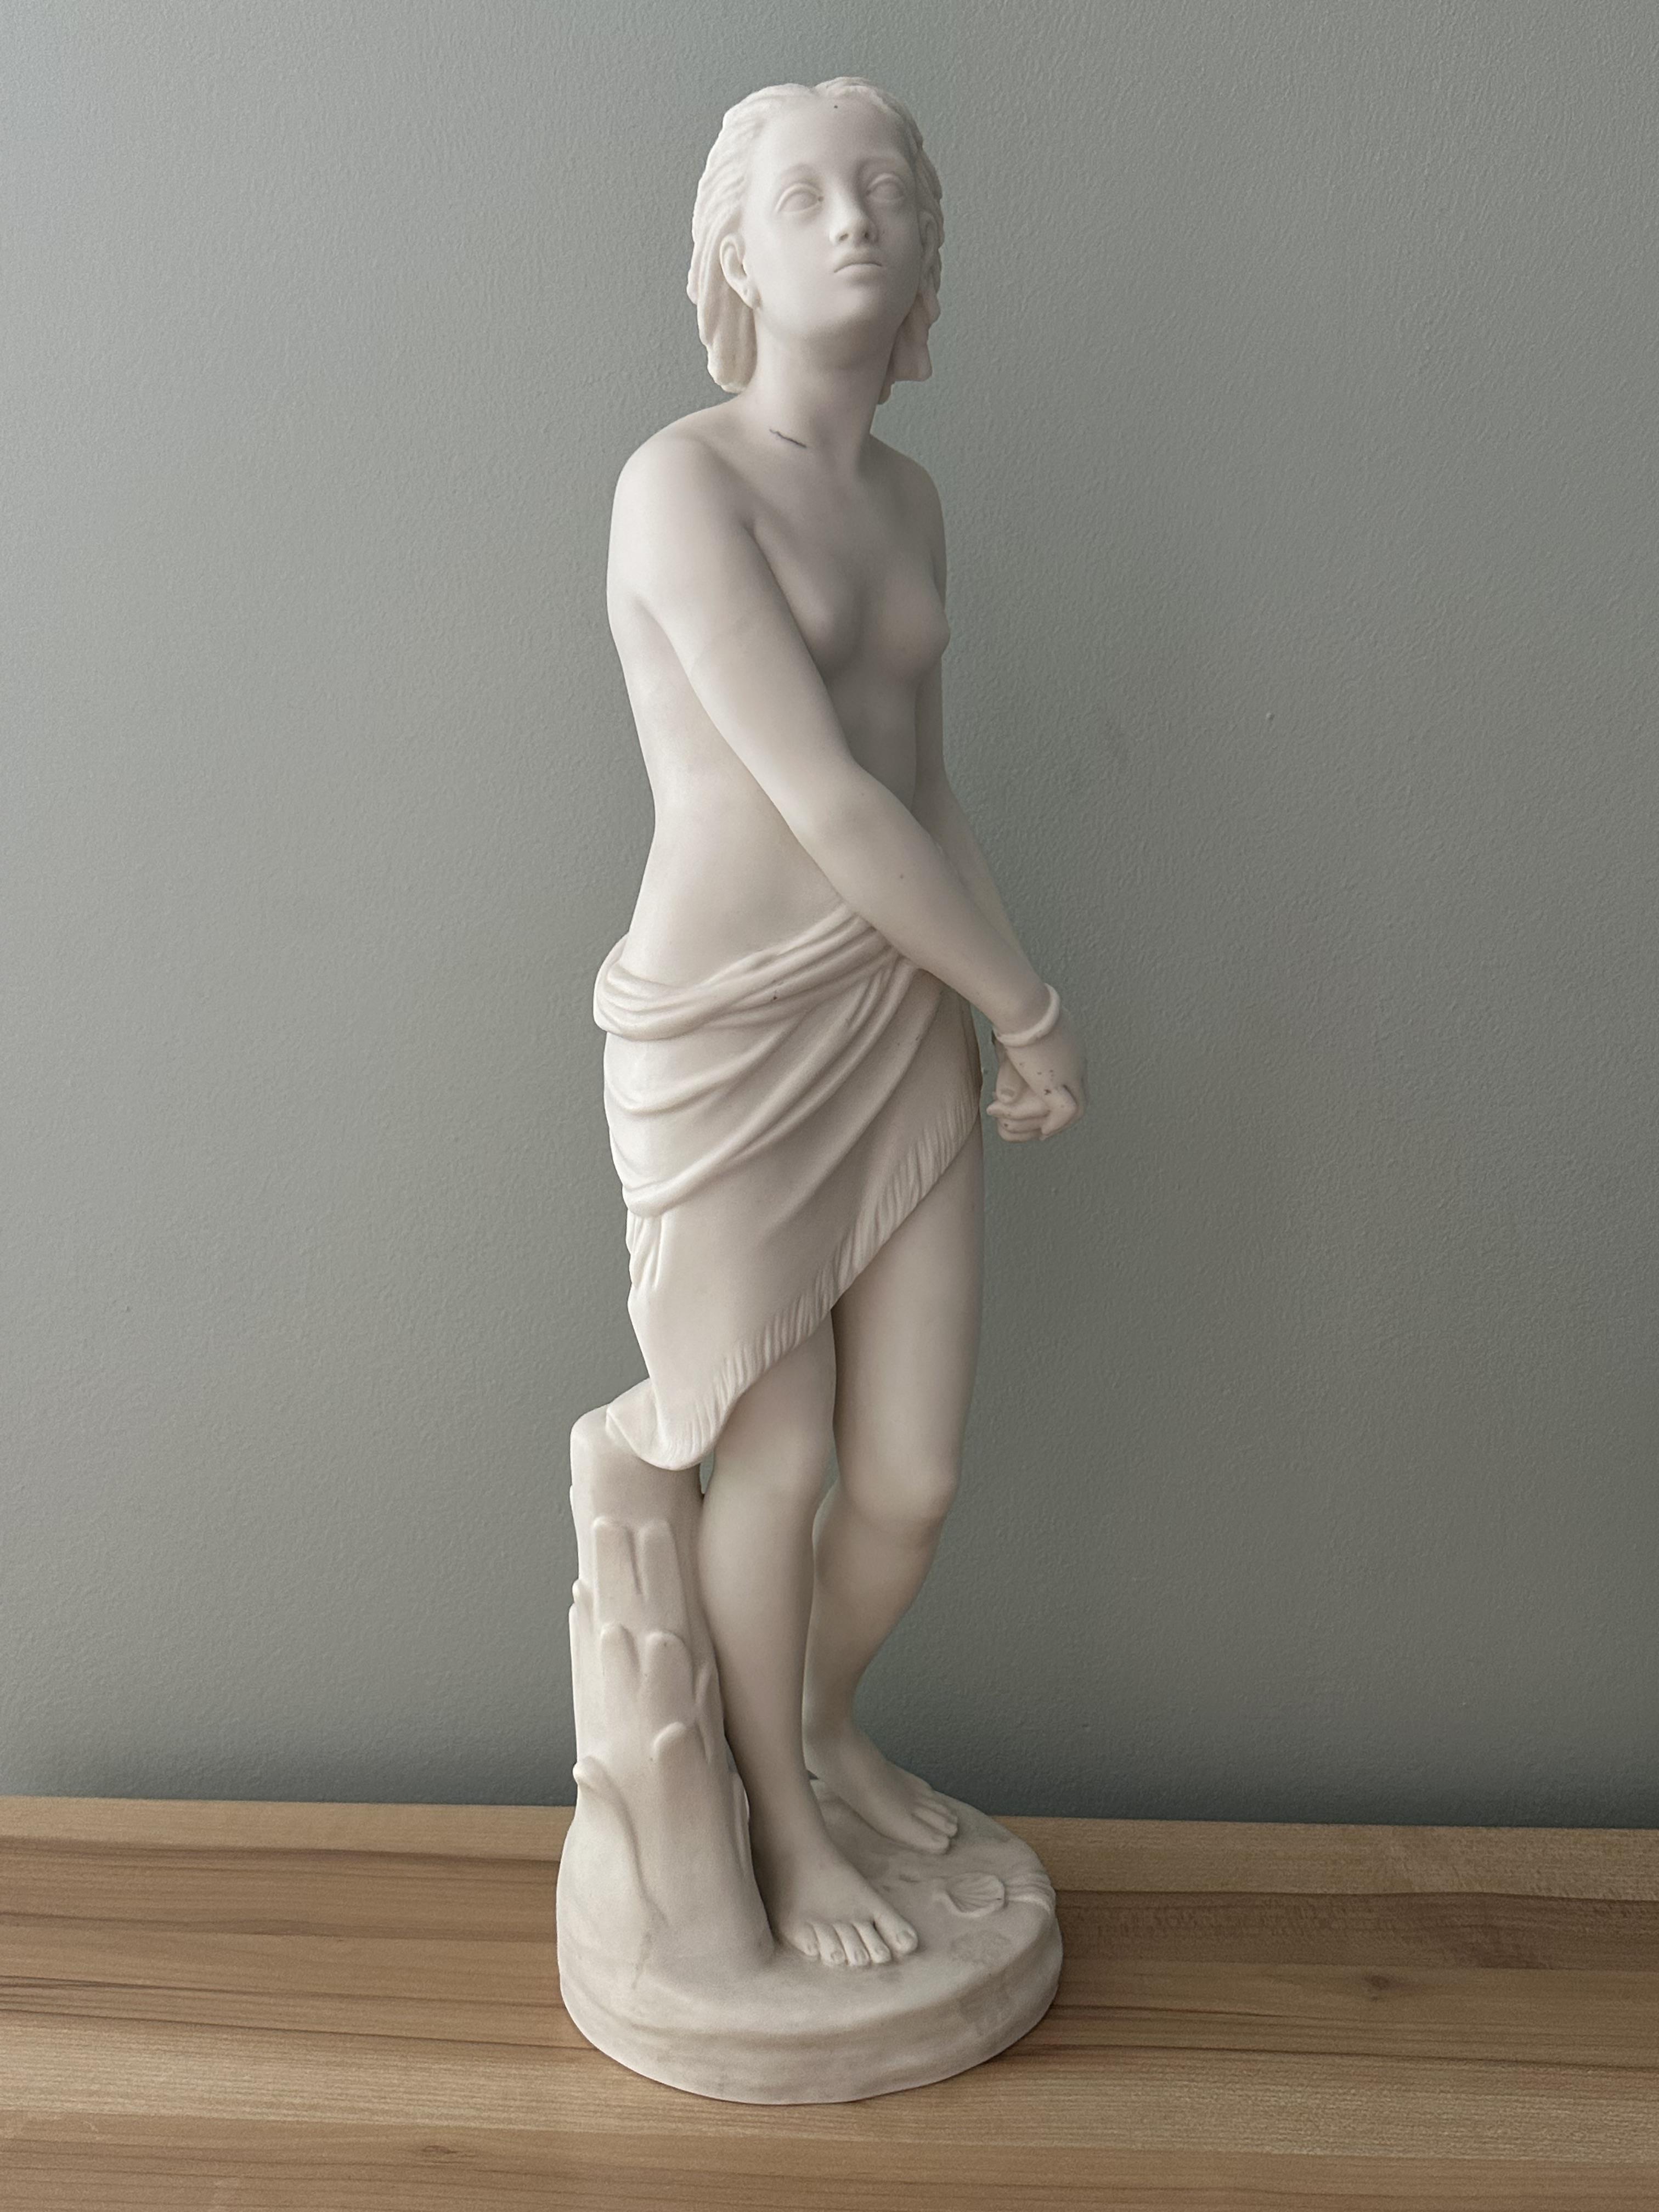 Parian Ware Minton Sculpture by John Bell. One ha - Image 9 of 16